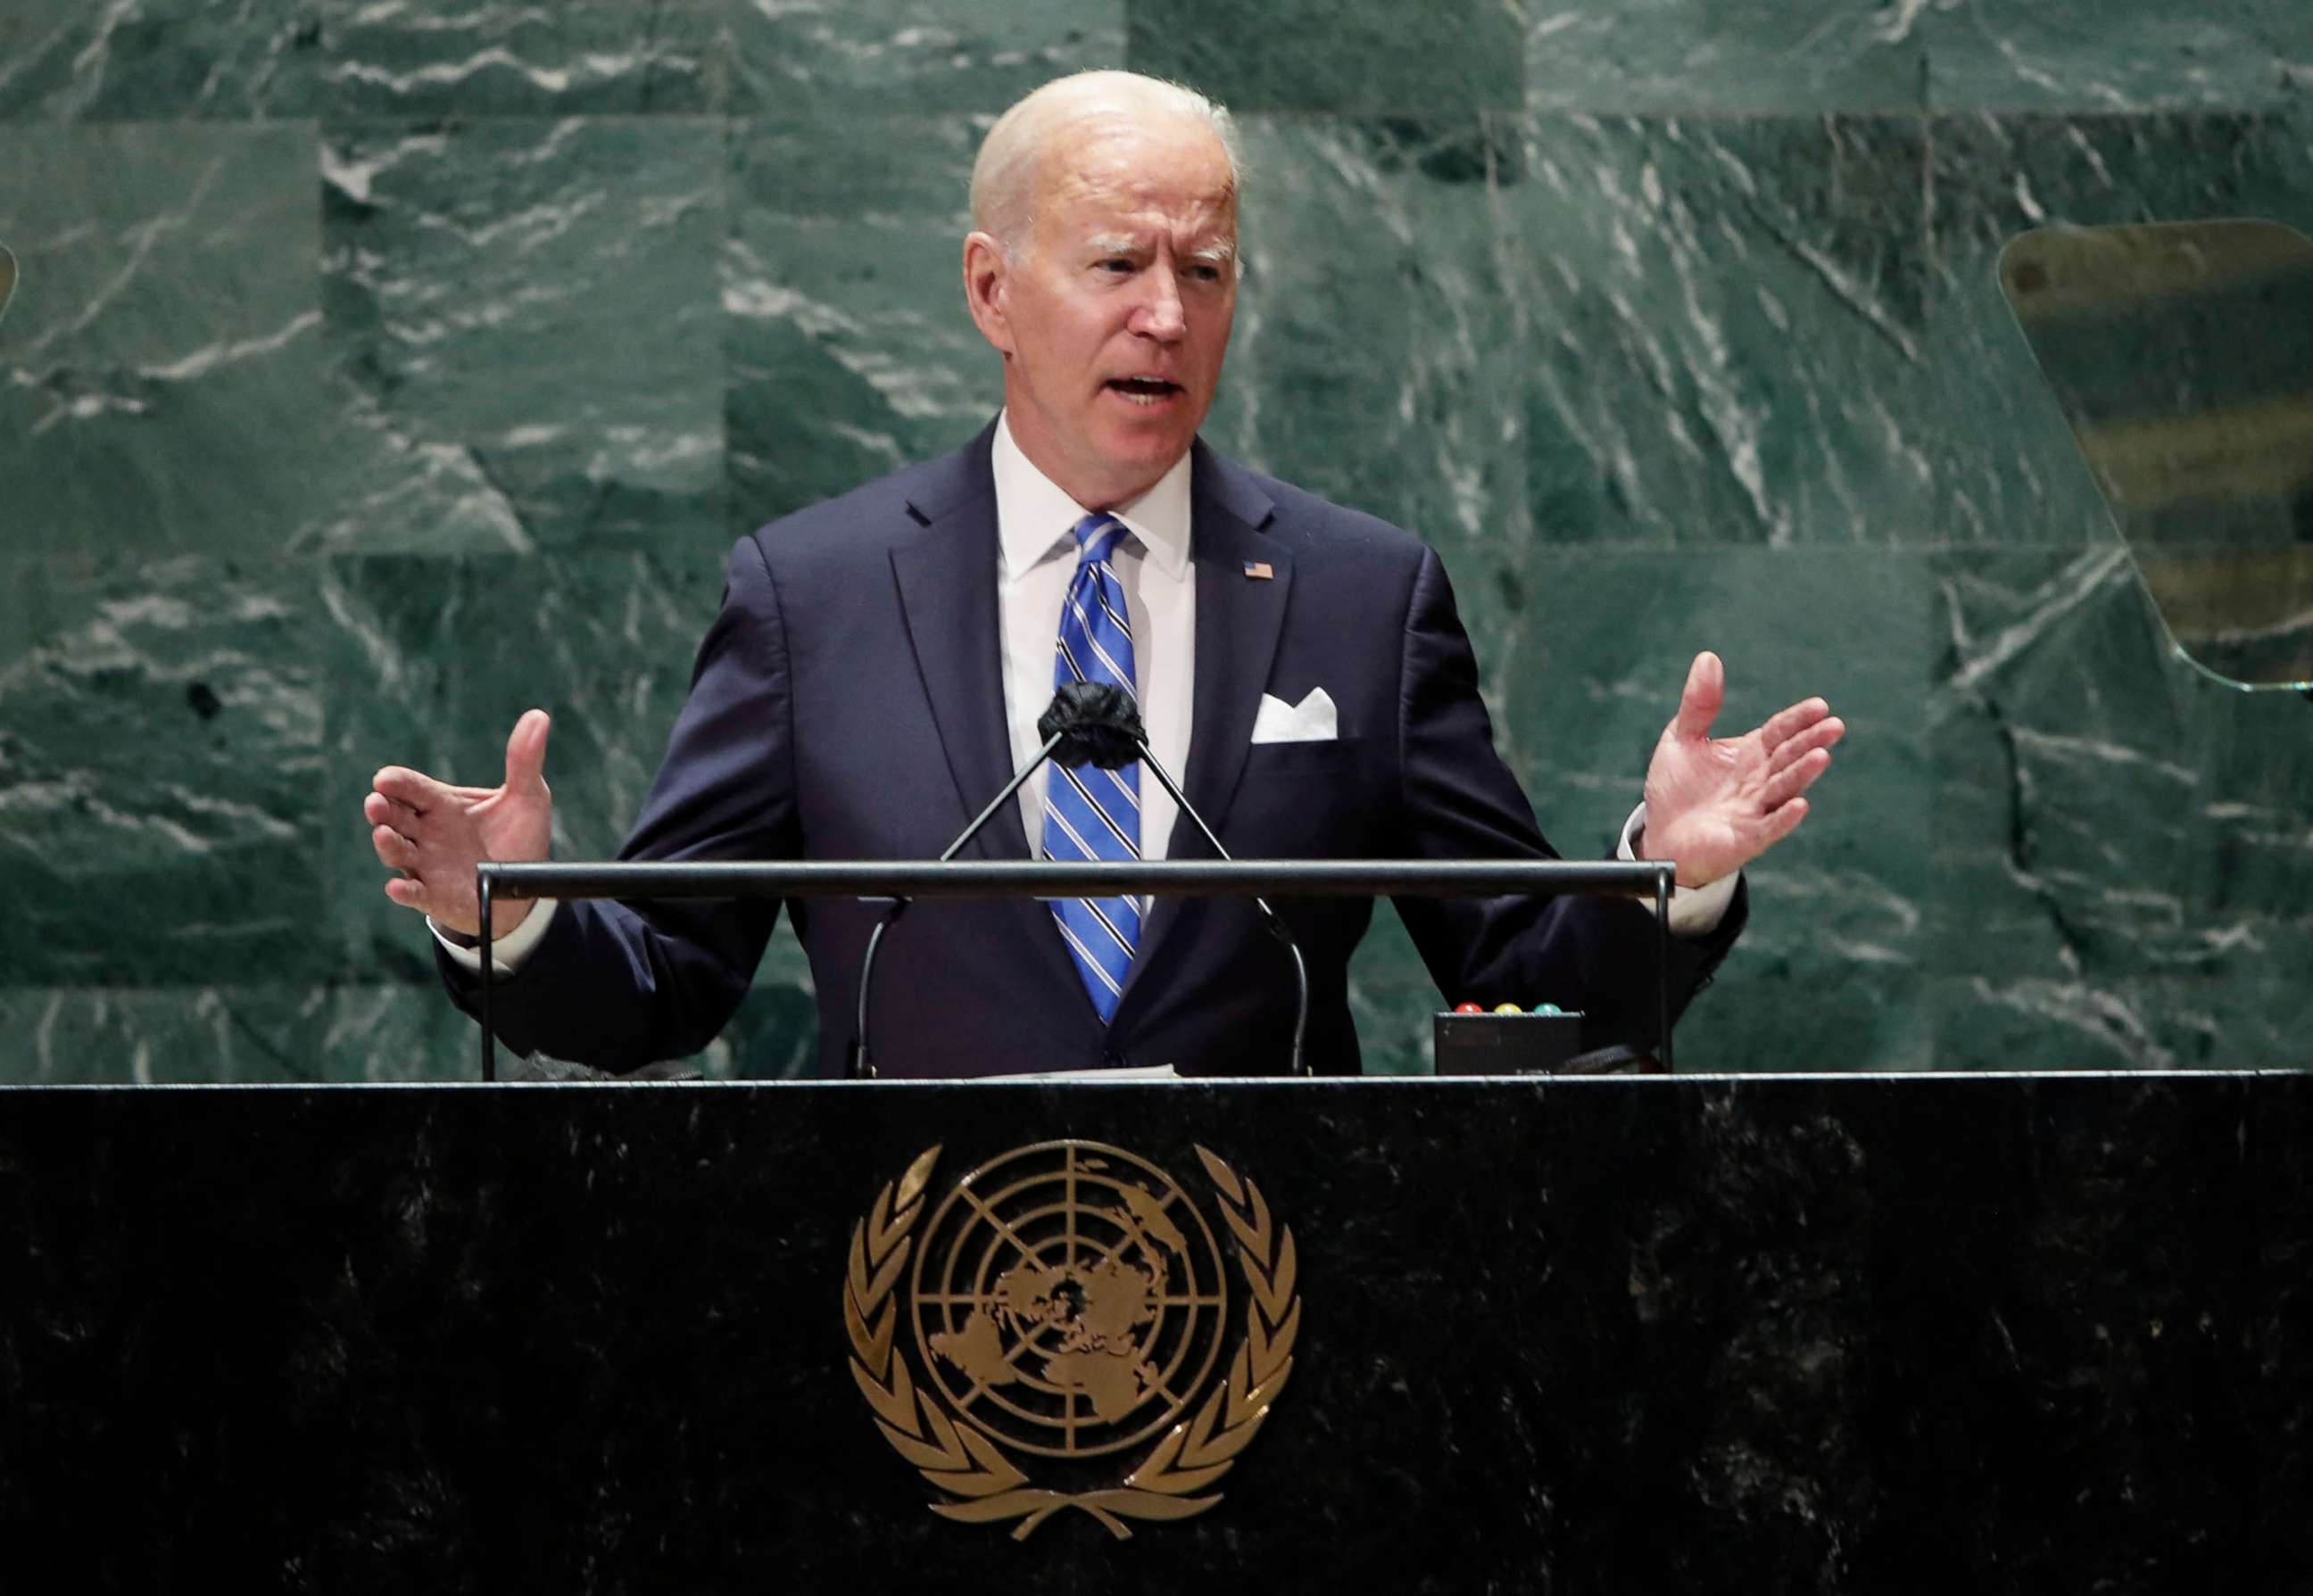 PHOTO: President Joe Biden addresses the 76th Session of the UN General Assembly on Sept. 21, 2021, in New York.